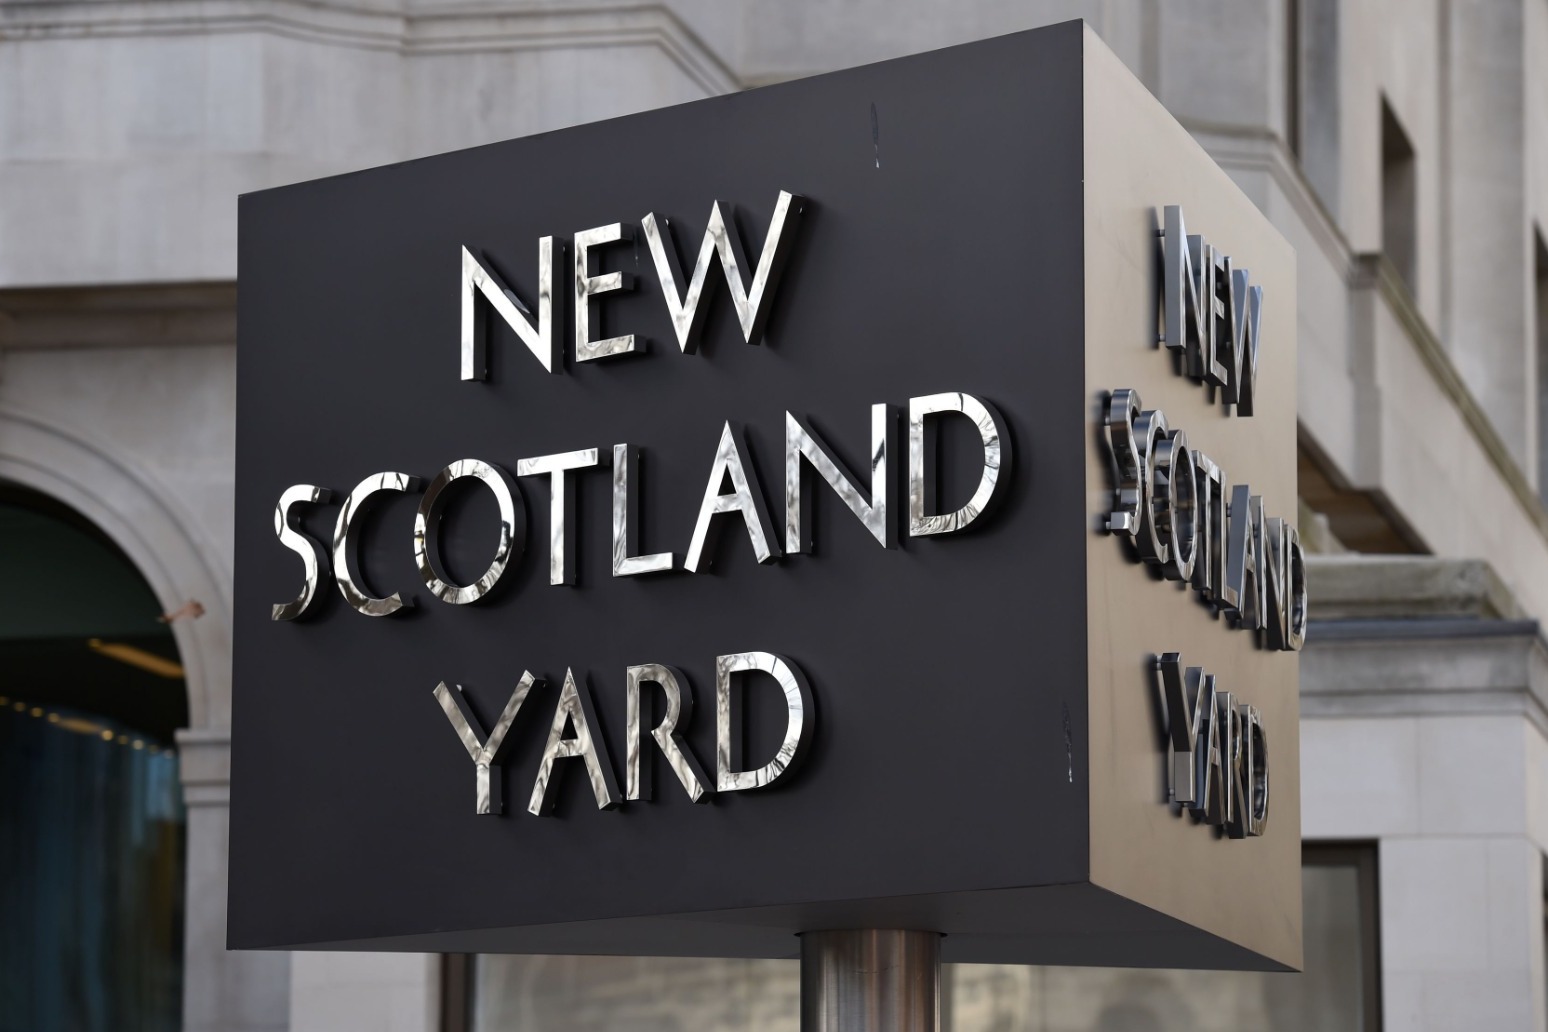 Met officers moved from serious crime squads to investigate internal standards 